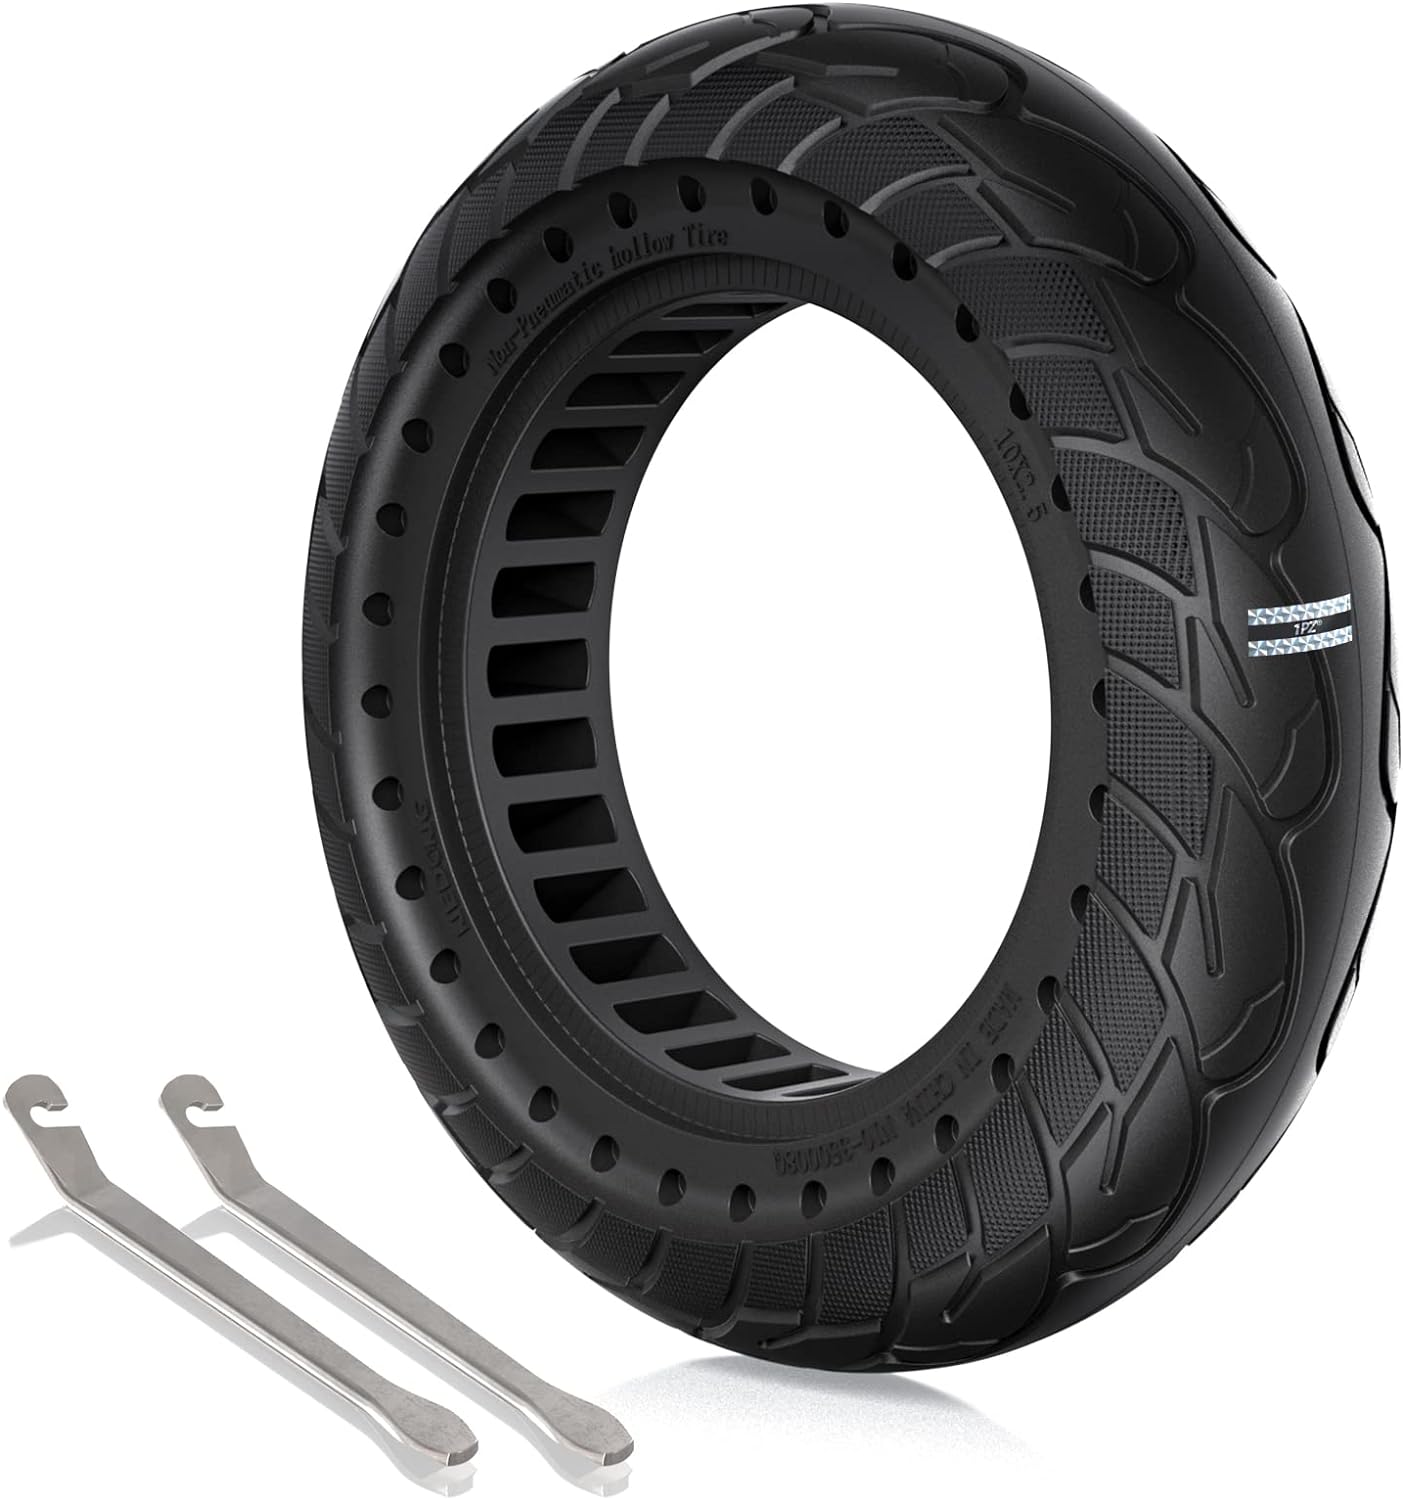 1PZ FT2-X02 10 Inch Tire 10x2.50 Solid Tire Replacement for Ninebot MAX G30 Electric Scooter